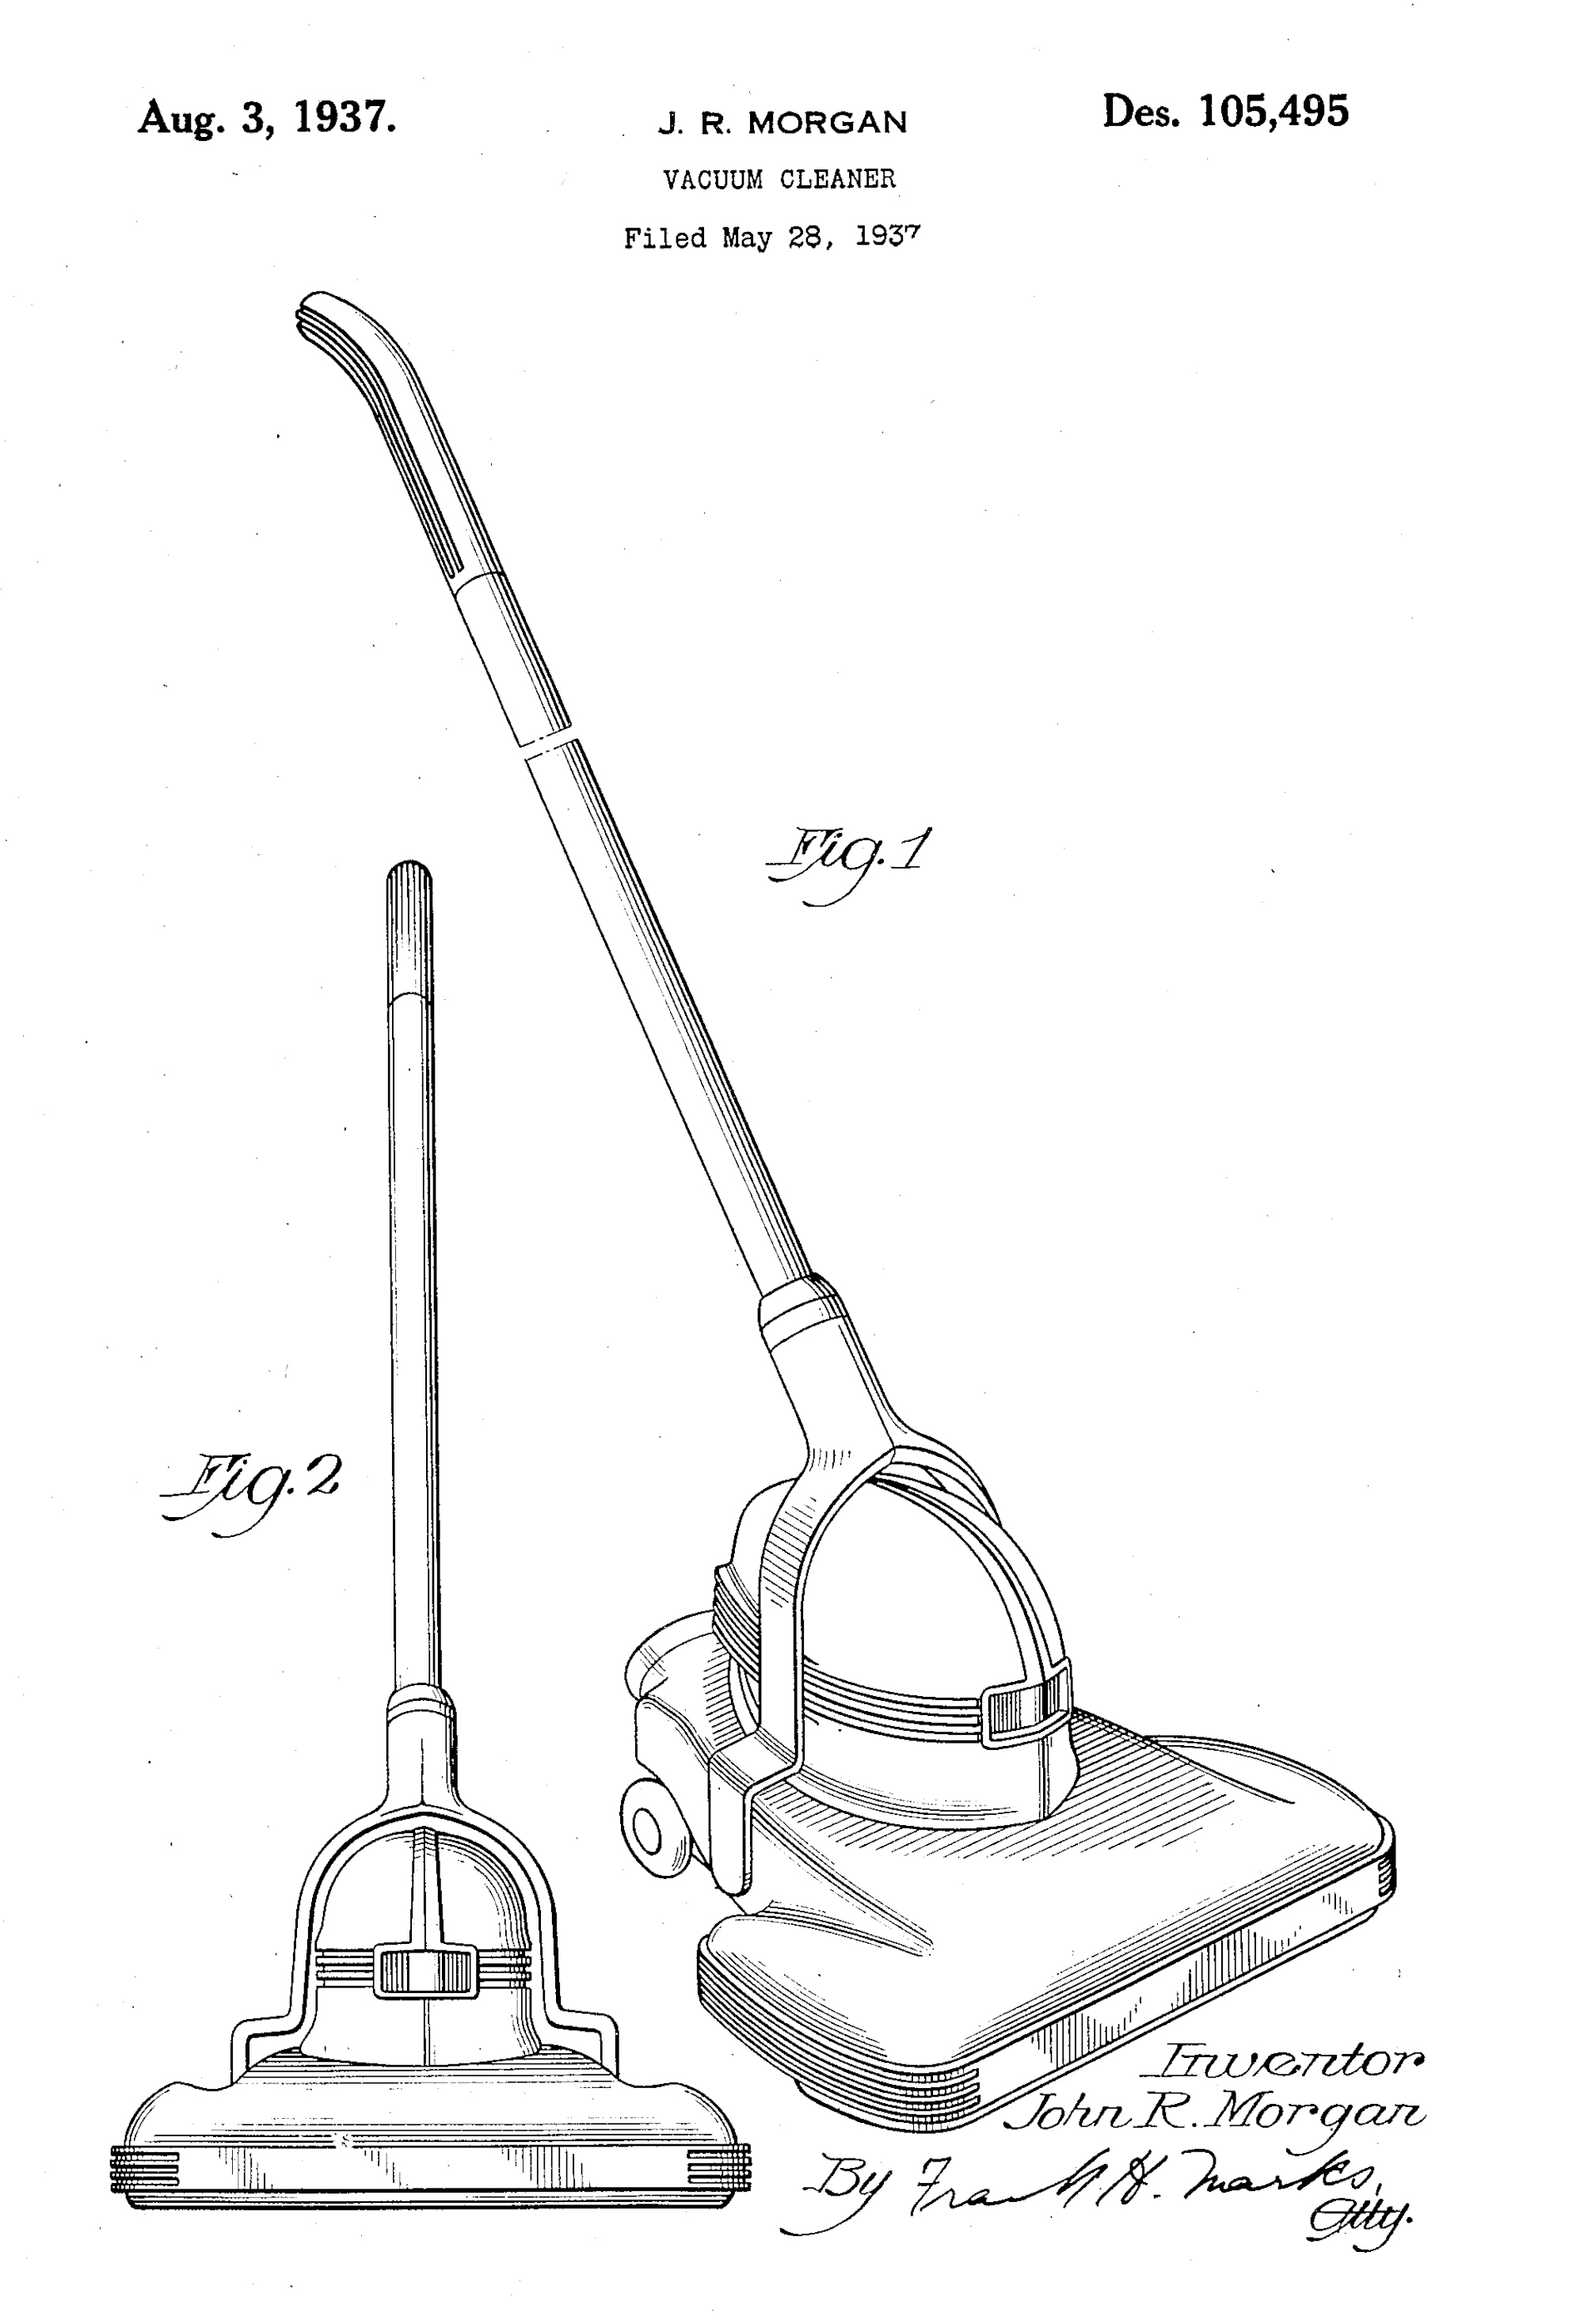 Vacuum Cleaner, John R. Morgan, for Sears, Roebuck & Company, 1937. Patent Number: USD 105,495, U.S. Patent Office